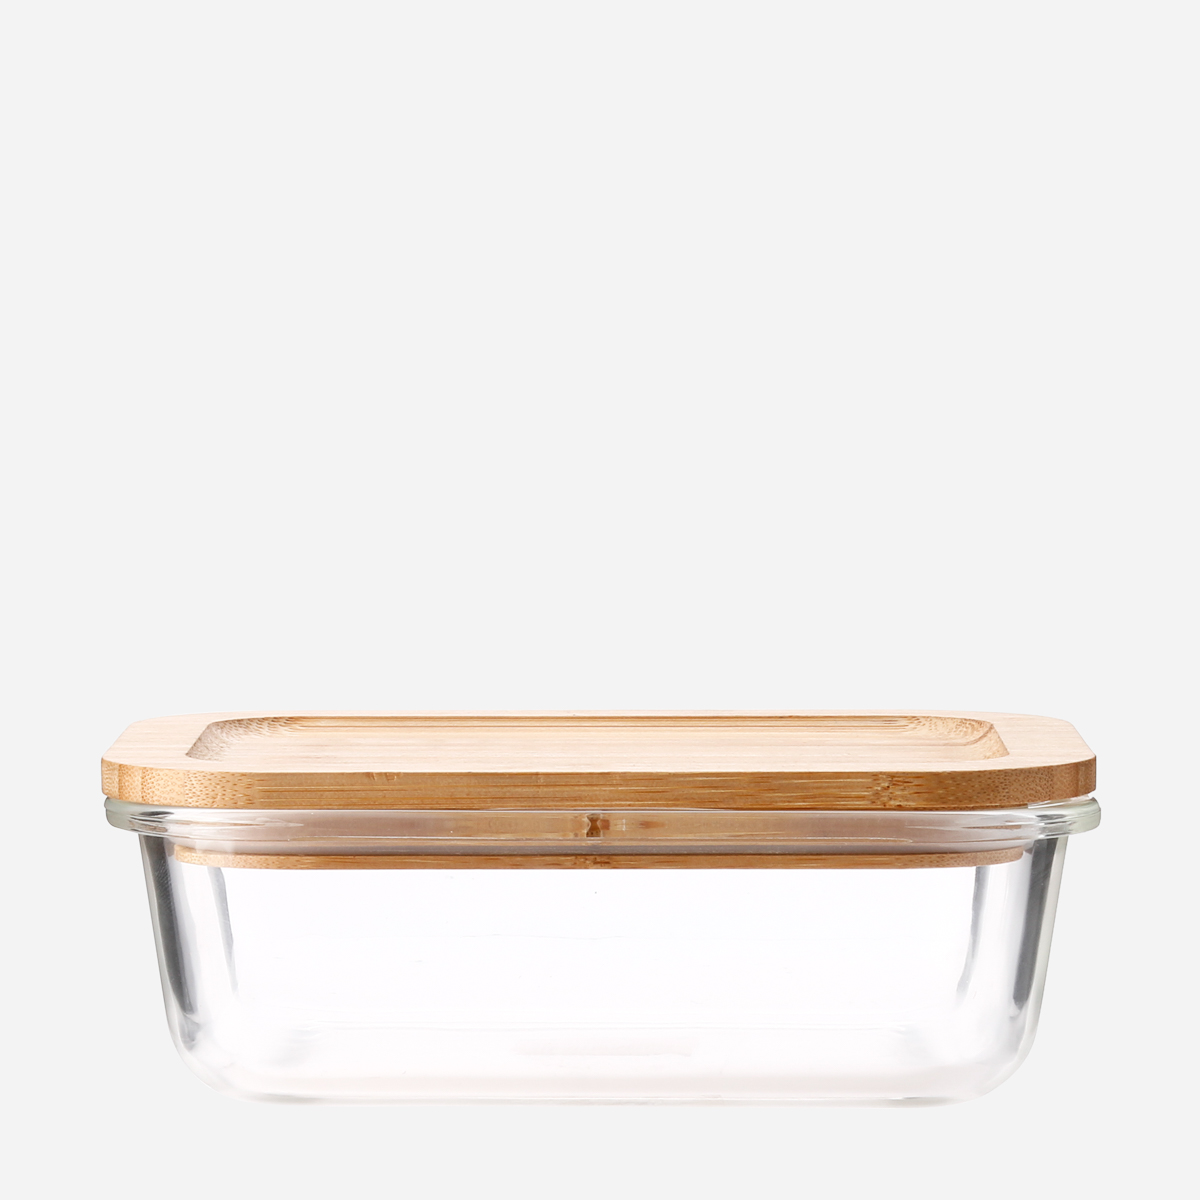 SM Home - Masflex Rectangular Glass Food Container with Bamboo Lid 640ml